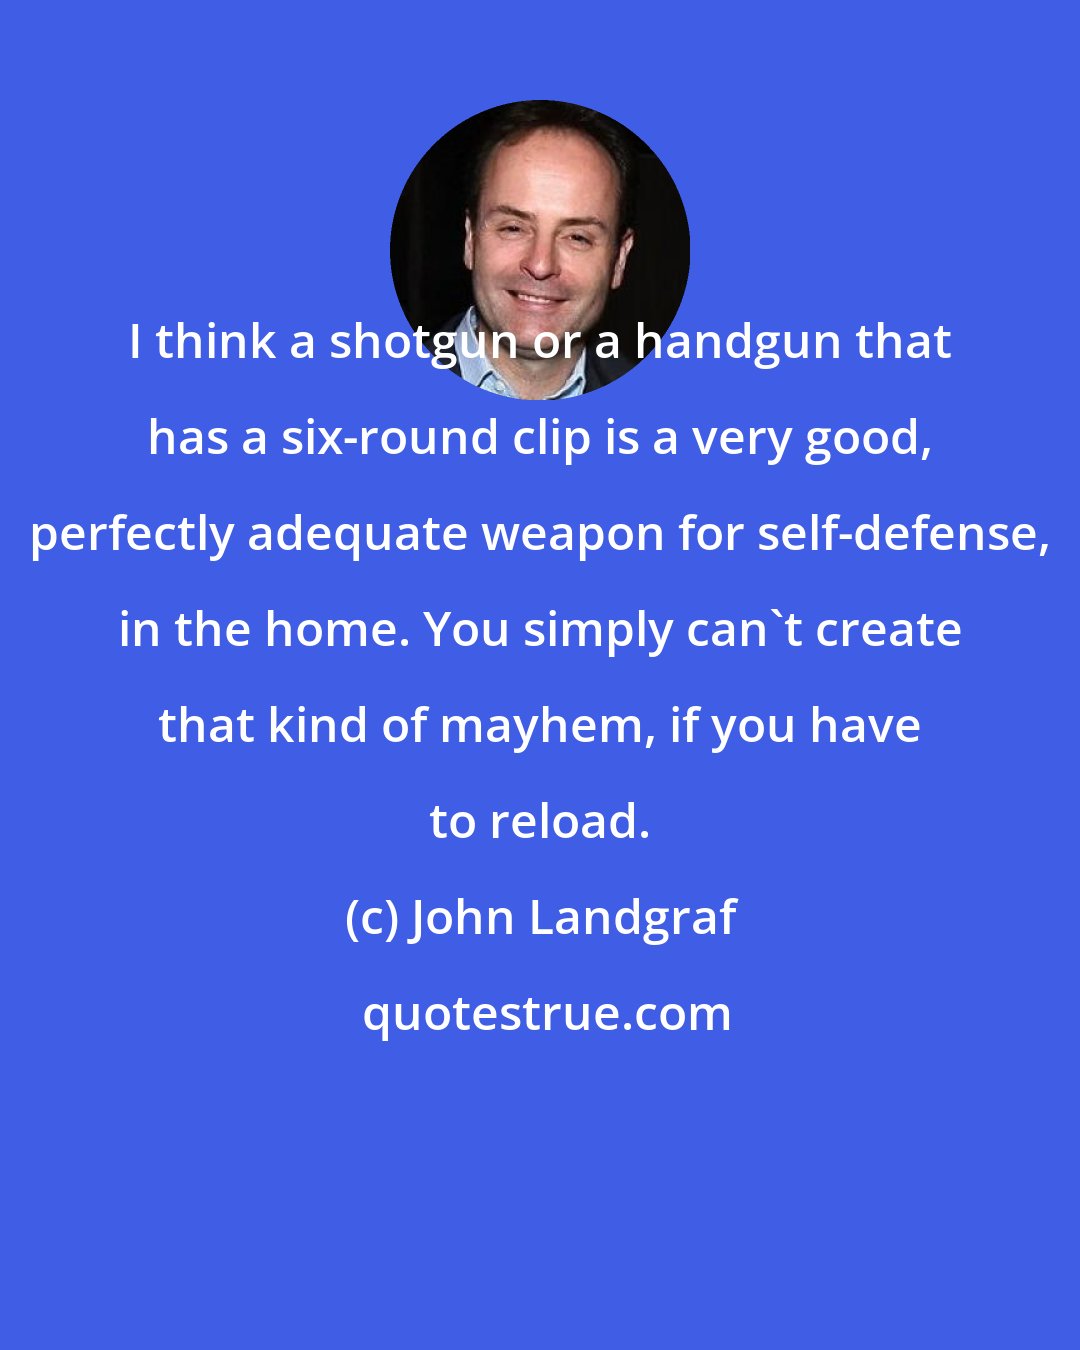 John Landgraf: I think a shotgun or a handgun that has a six-round clip is a very good, perfectly adequate weapon for self-defense, in the home. You simply can't create that kind of mayhem, if you have to reload.